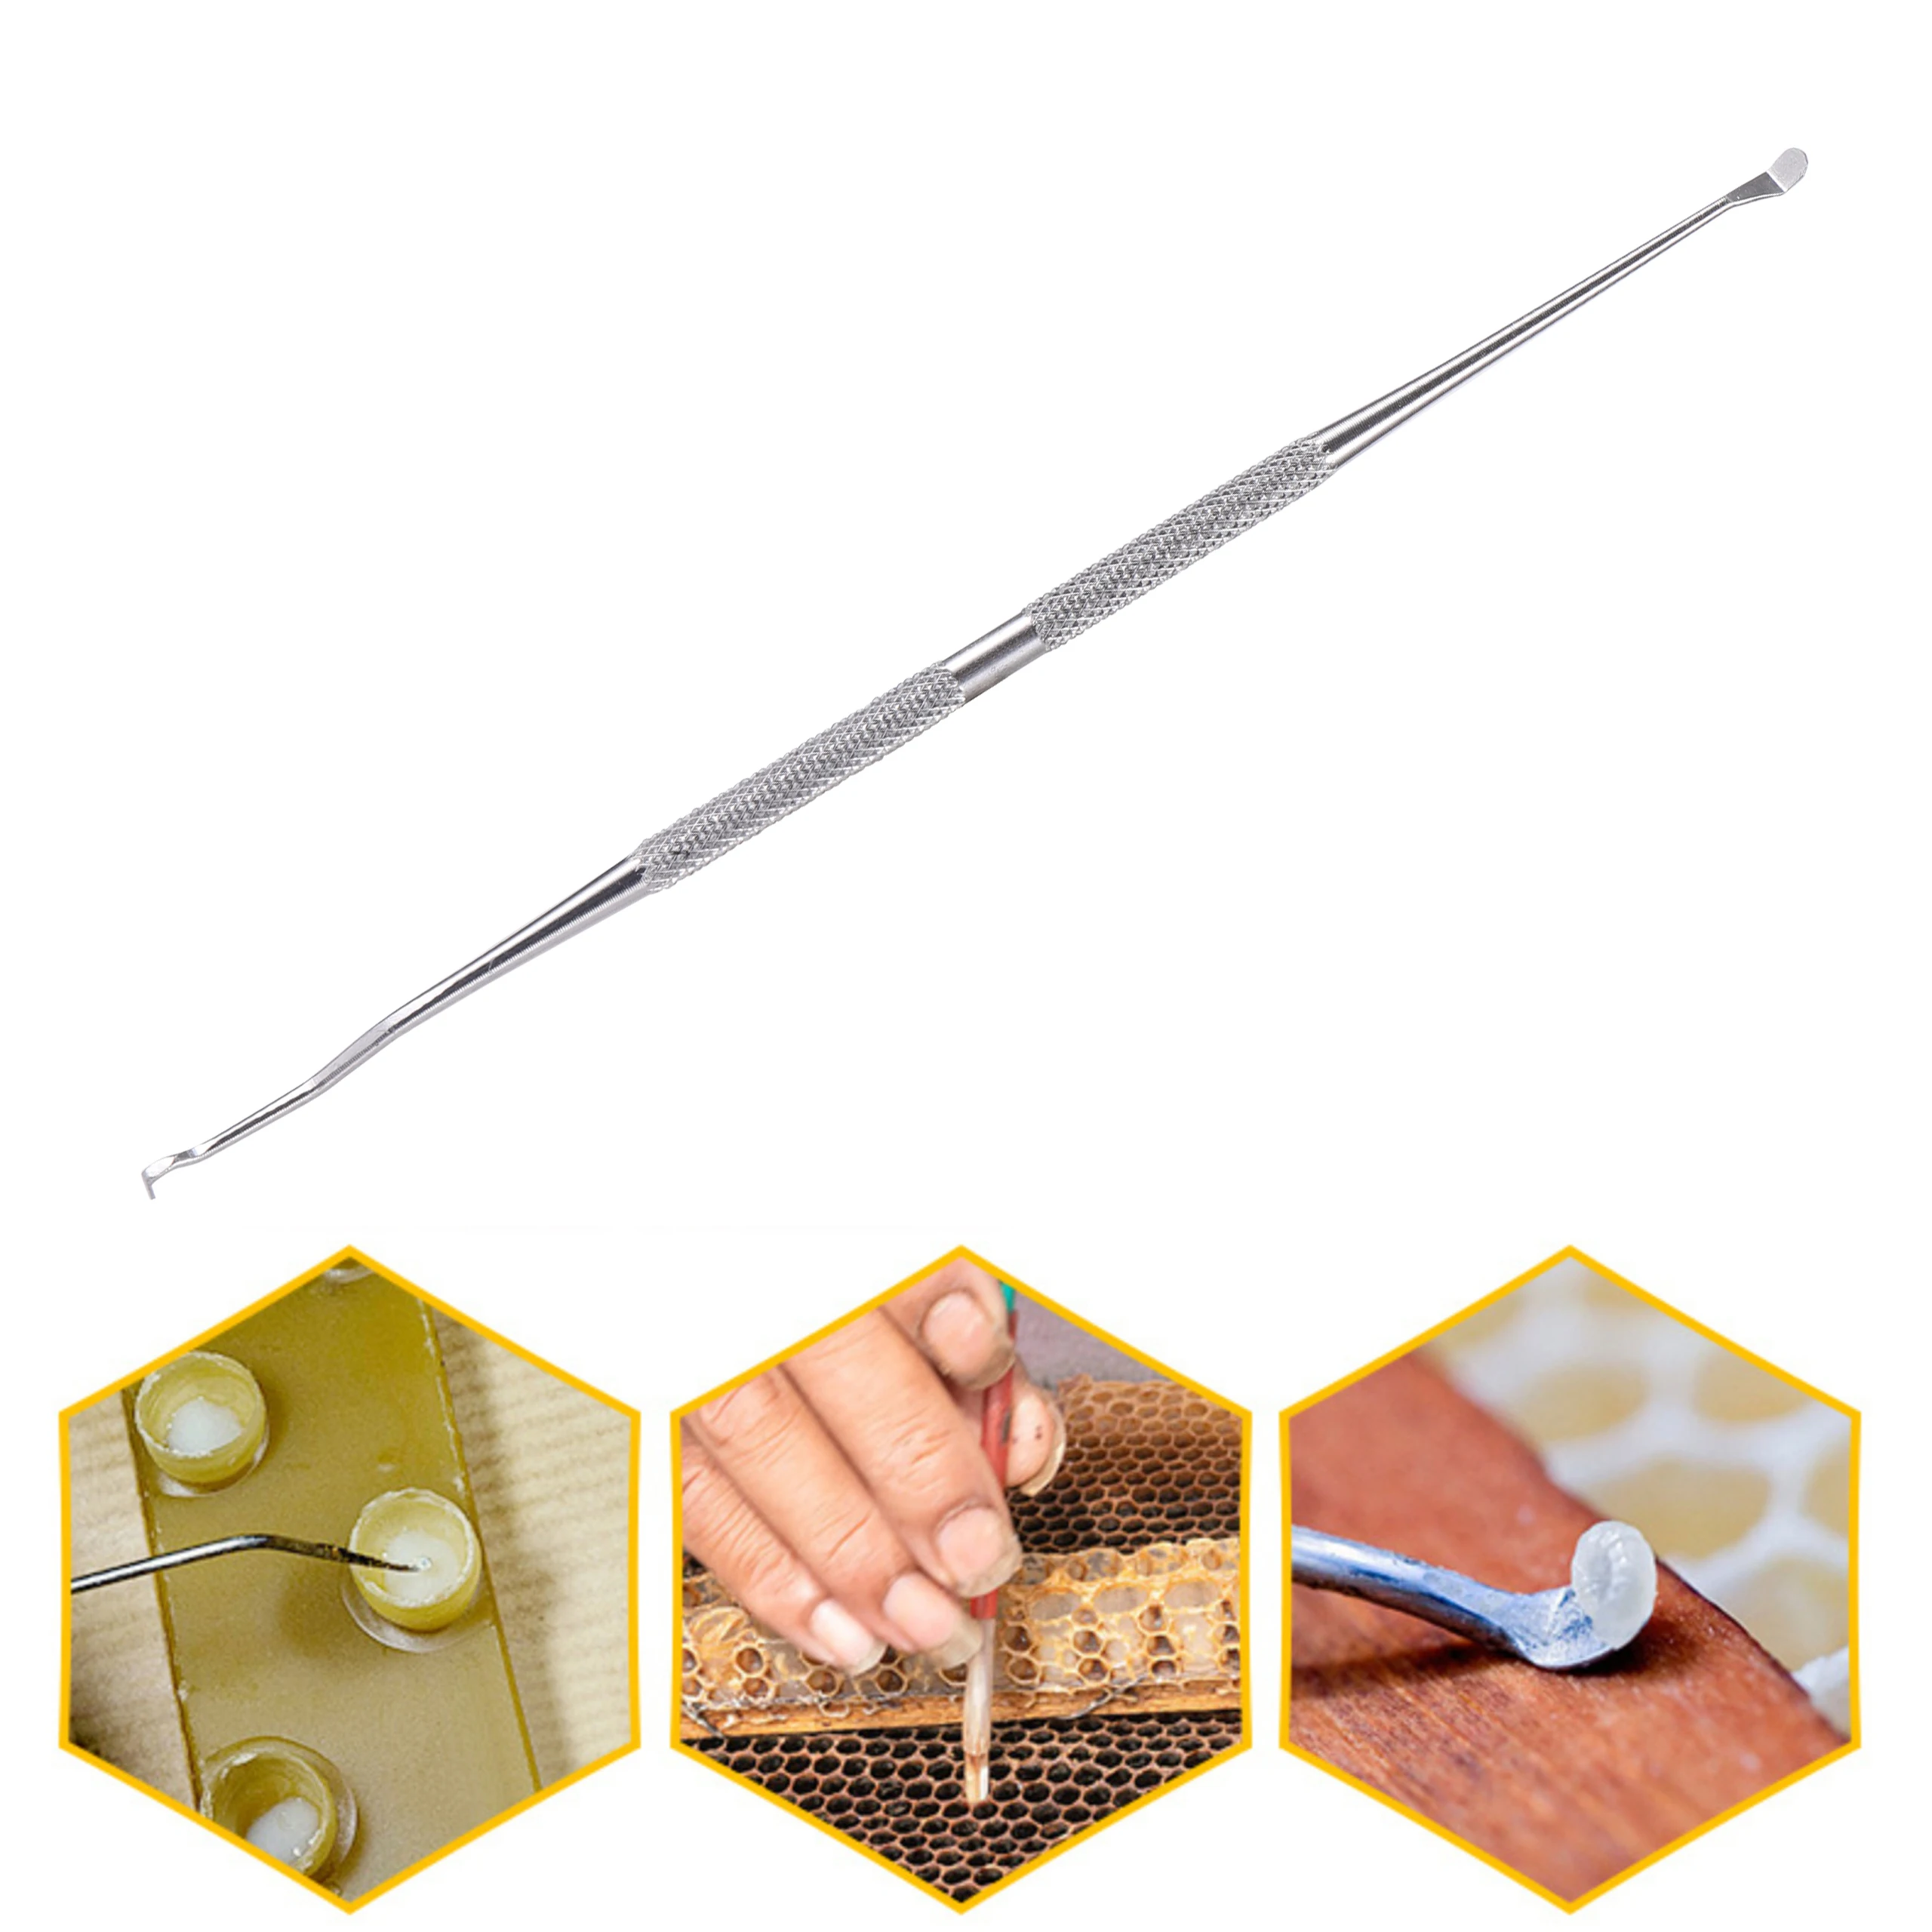 Stainless Steel Needle Bee Queen Larva Transferring Needle Dual Purpose Beekeeping Shift Pin Worm Moving Grafting Tool